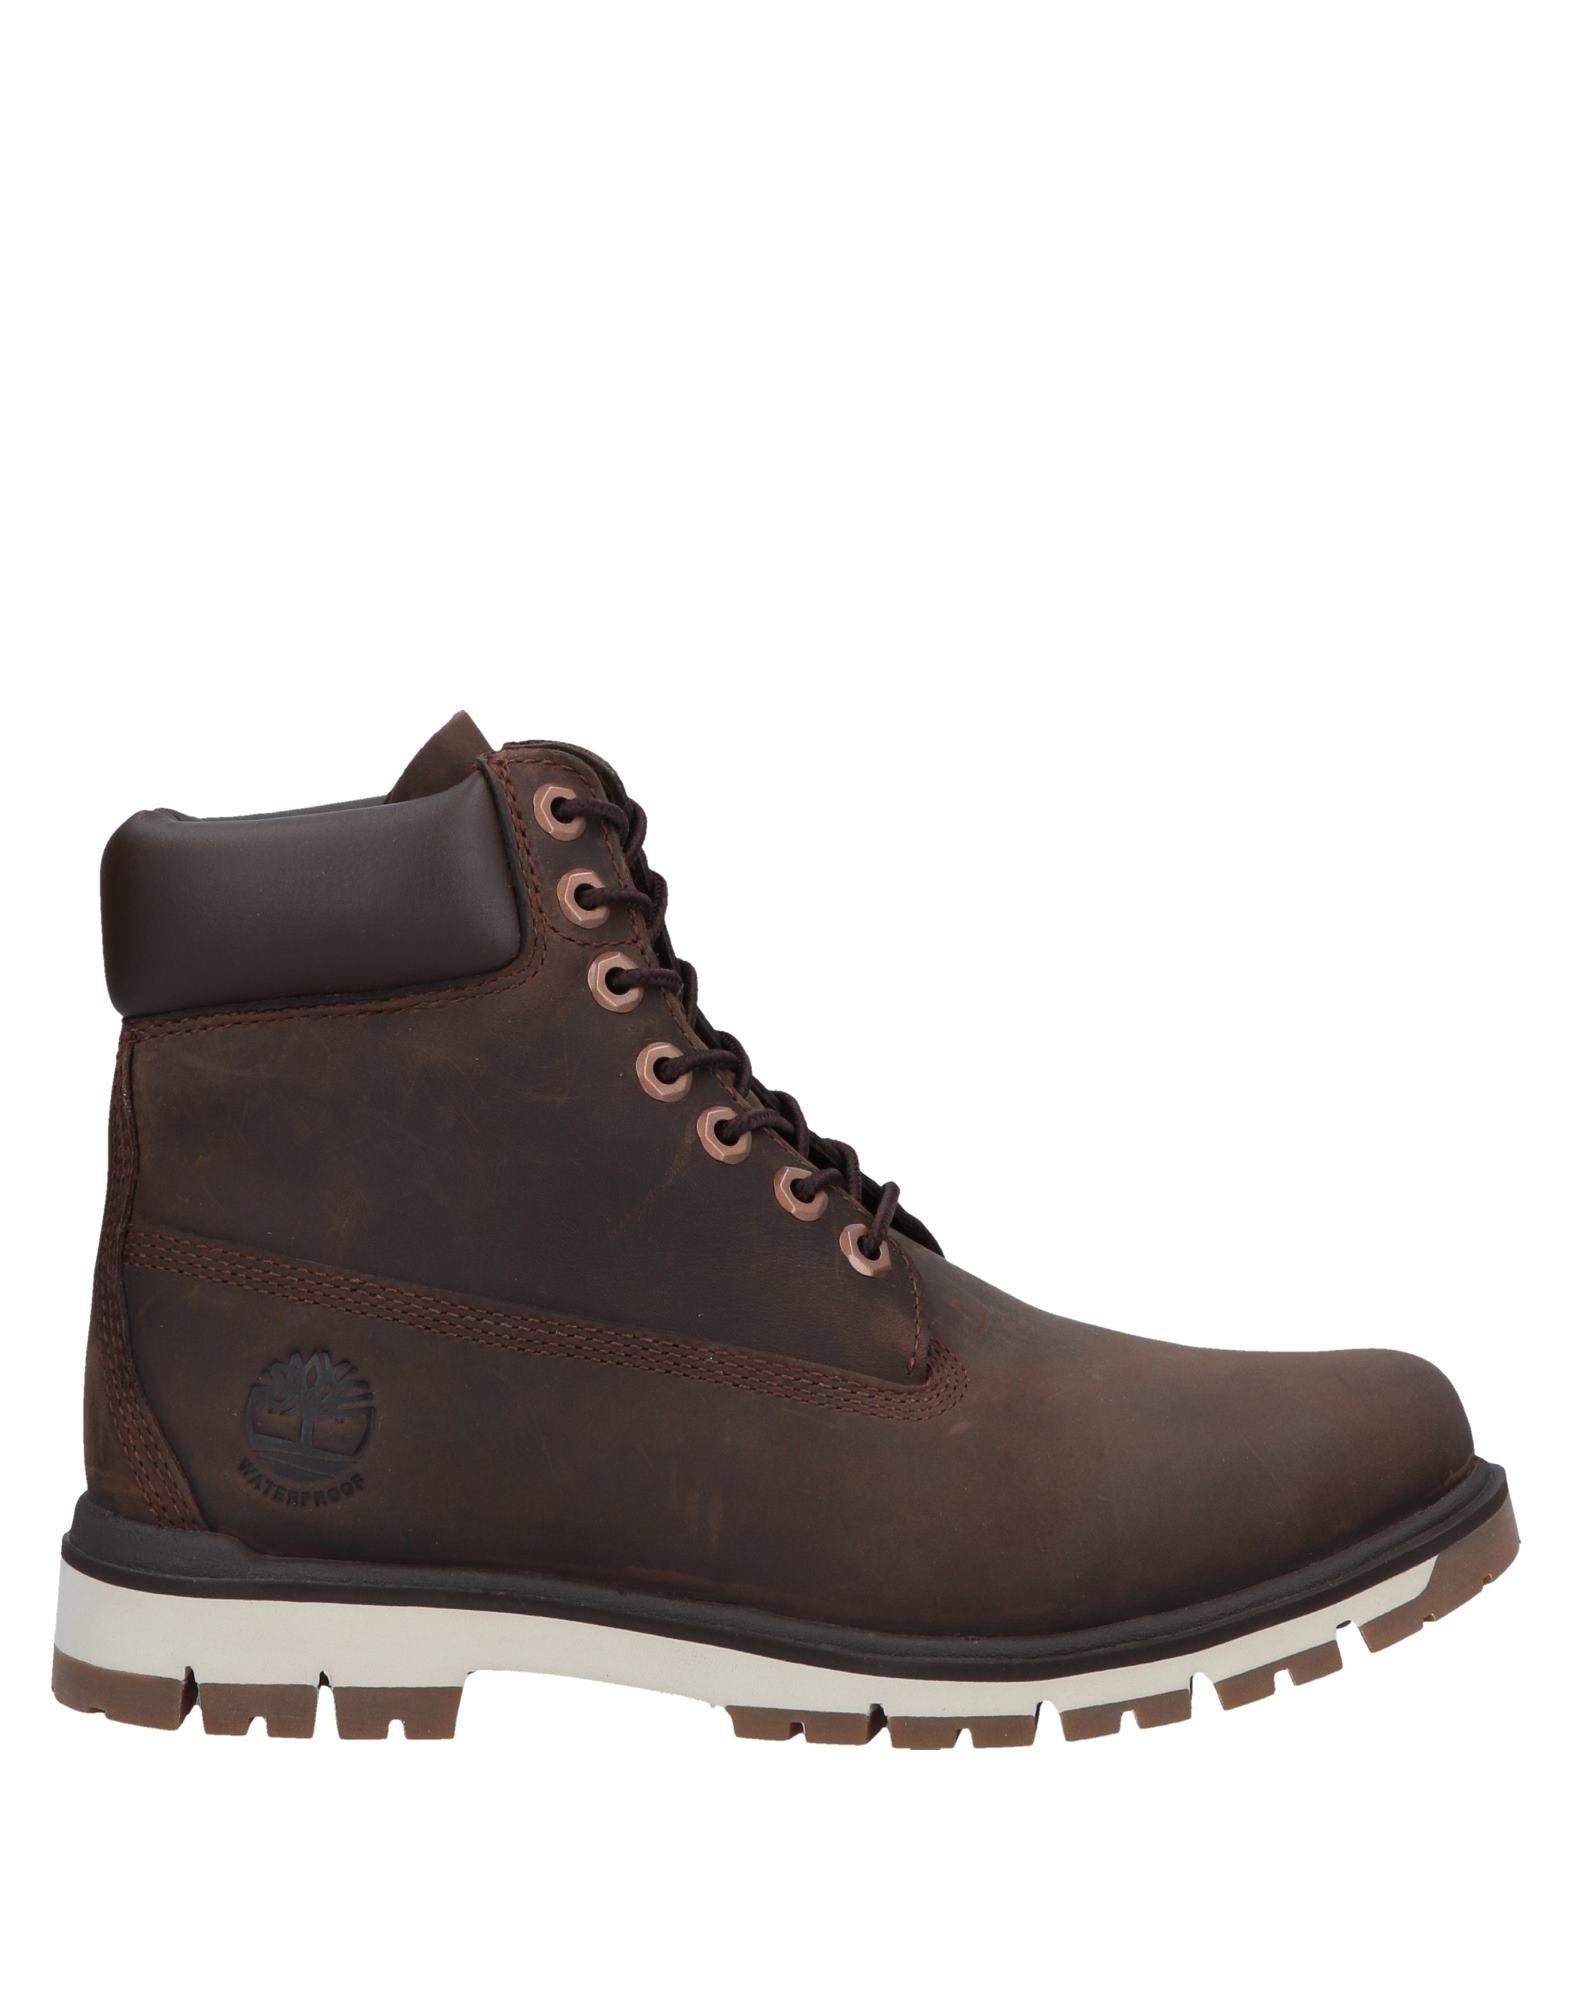 Timberland Leather Ankle Boots in Cocoa (Brown) for Men - Lyst